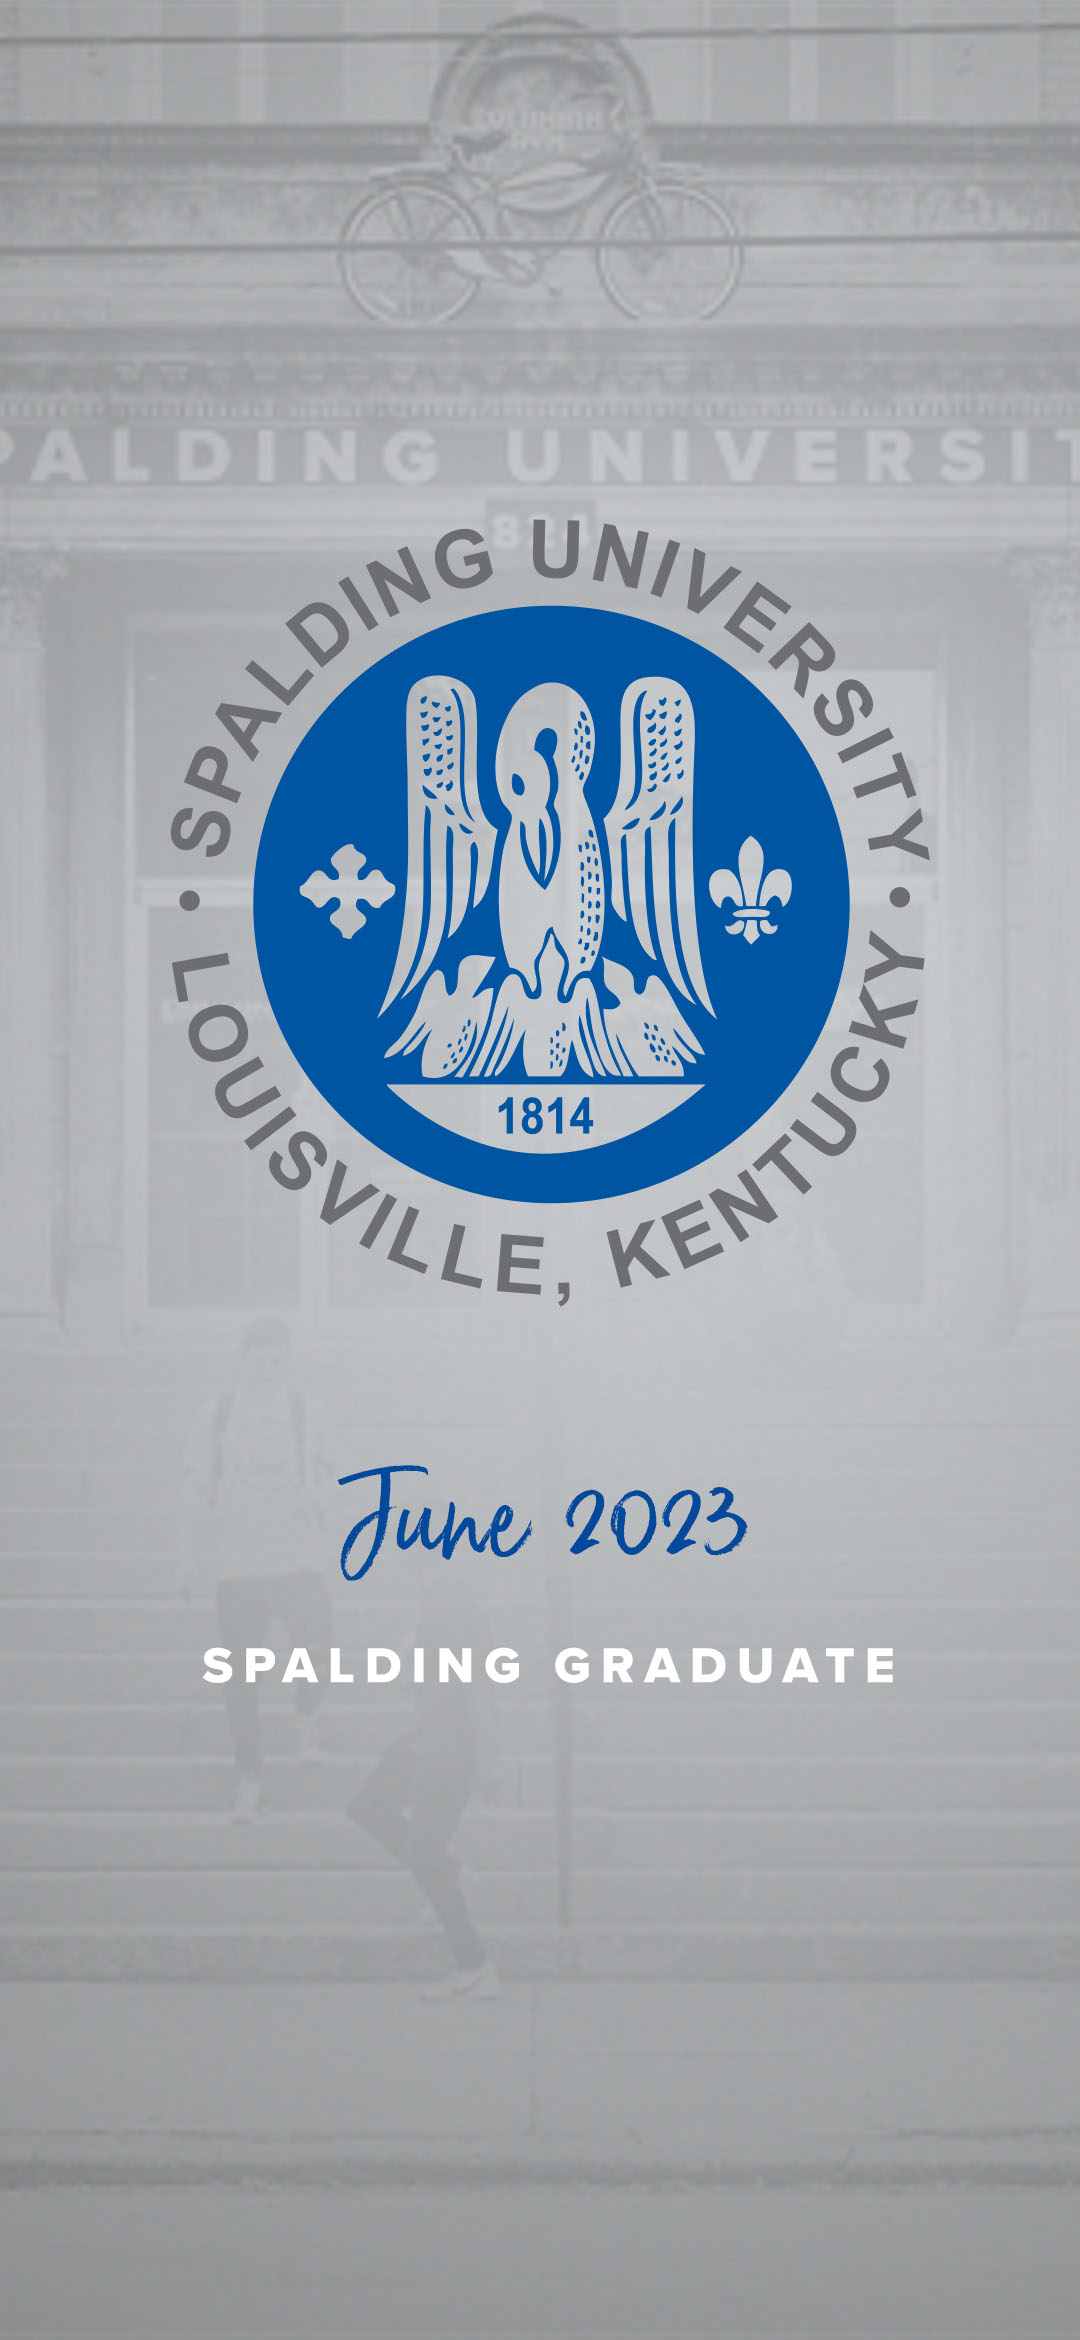 Spalding University graduate wallpaper, gray background with blue pelican seal